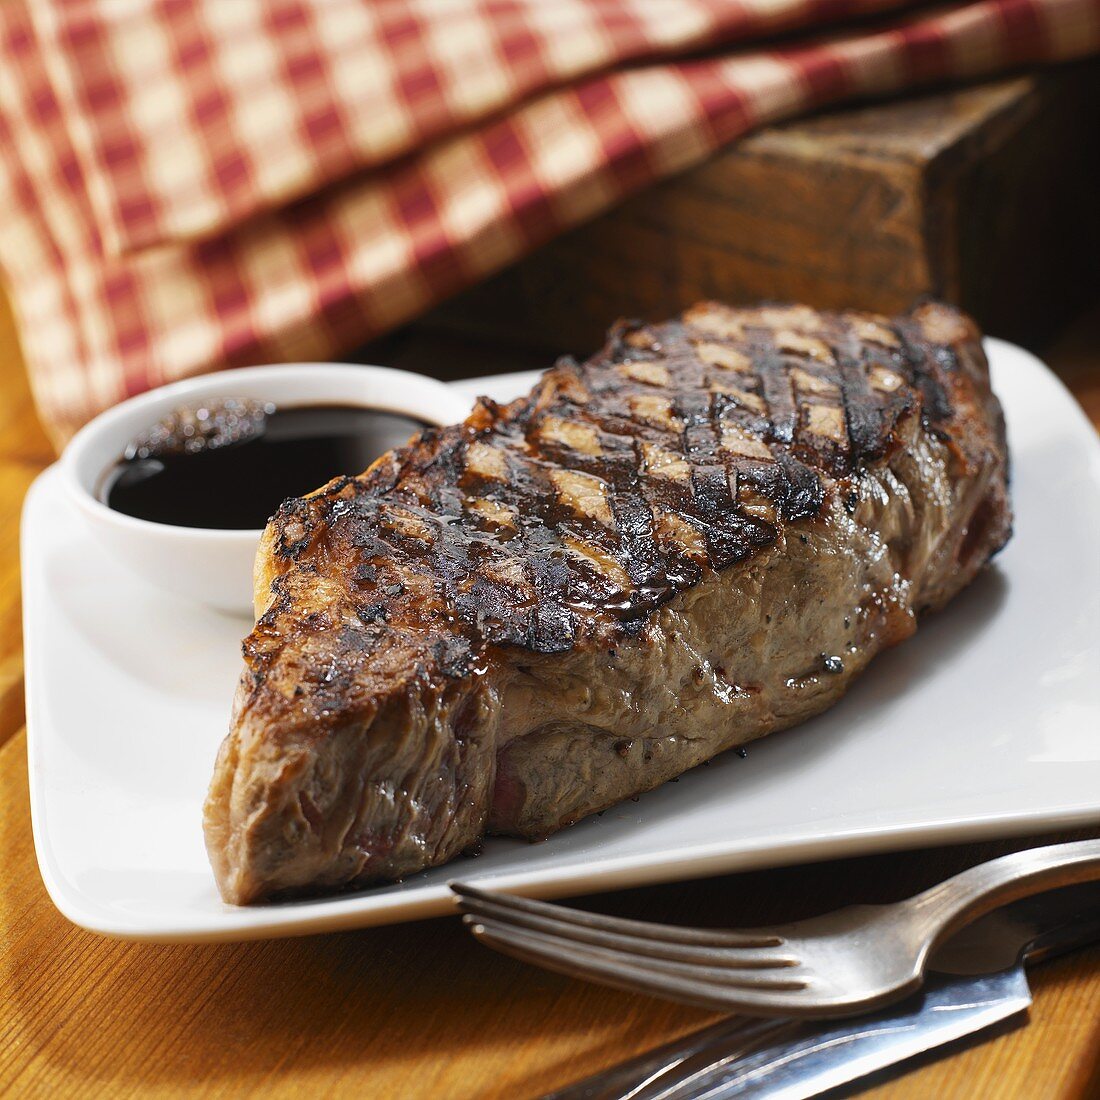 Grilled steak with sauce